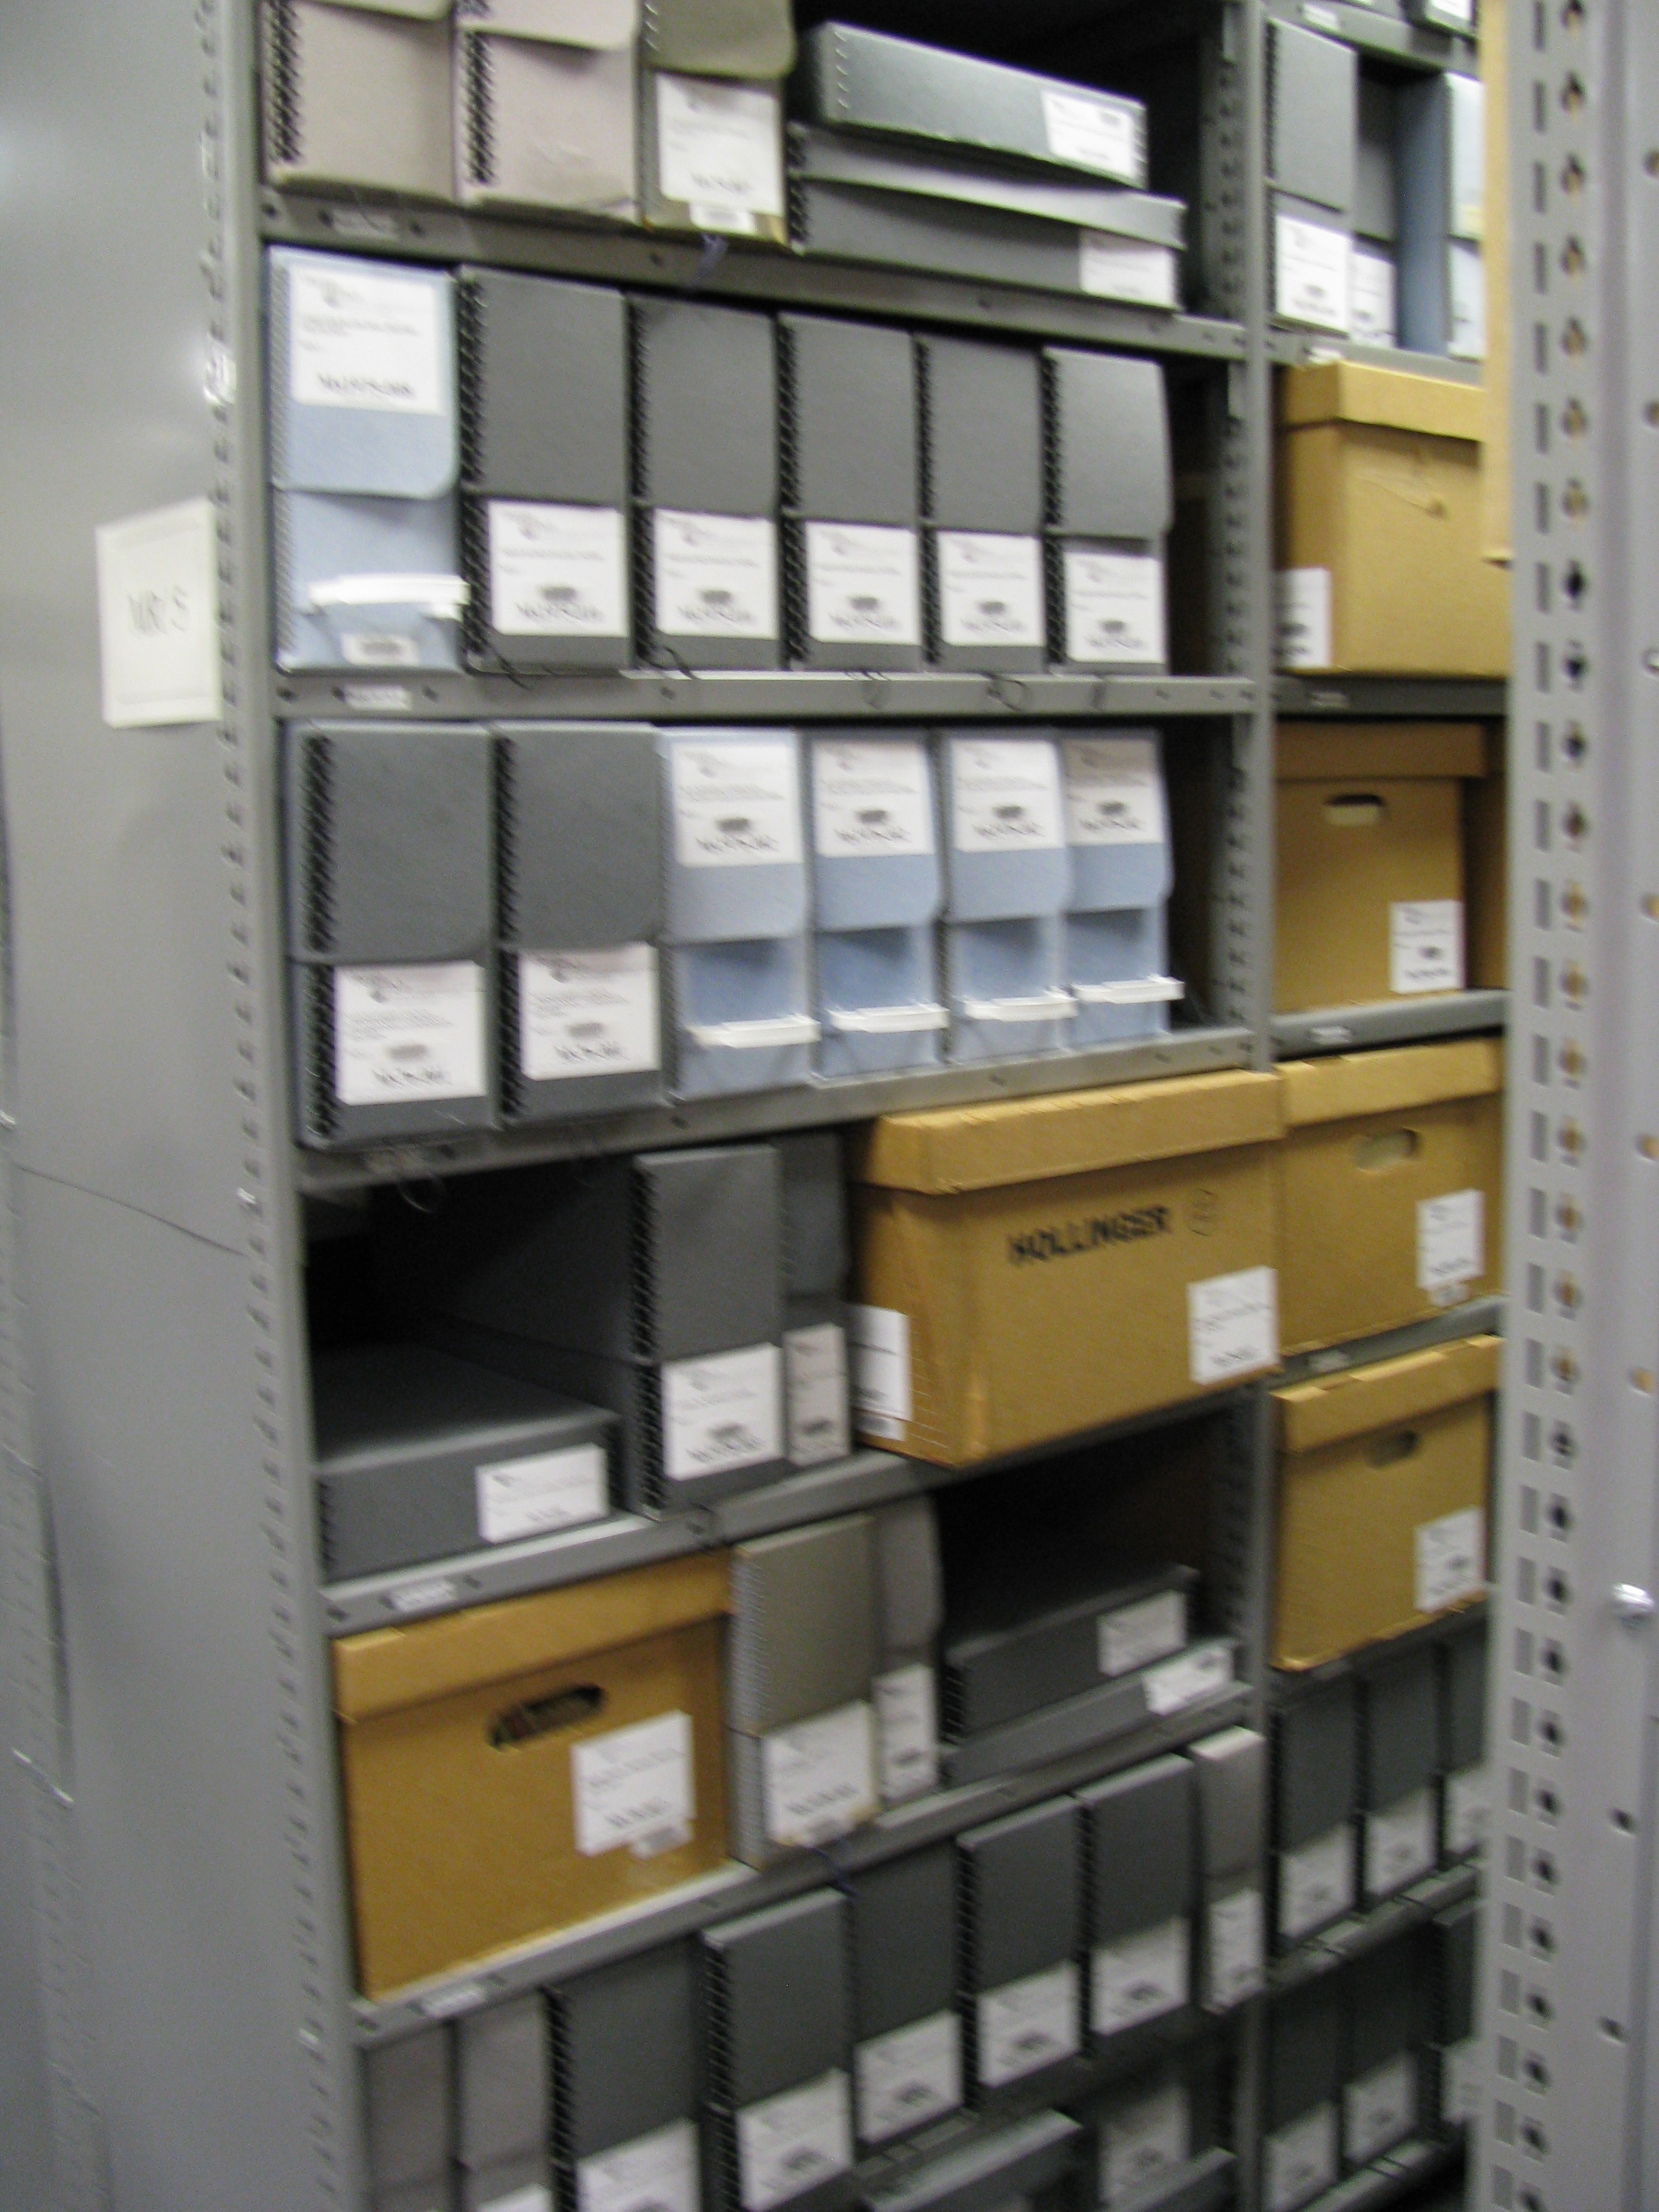 To be honest, manuscript collections means lots of boxes on shelves. 